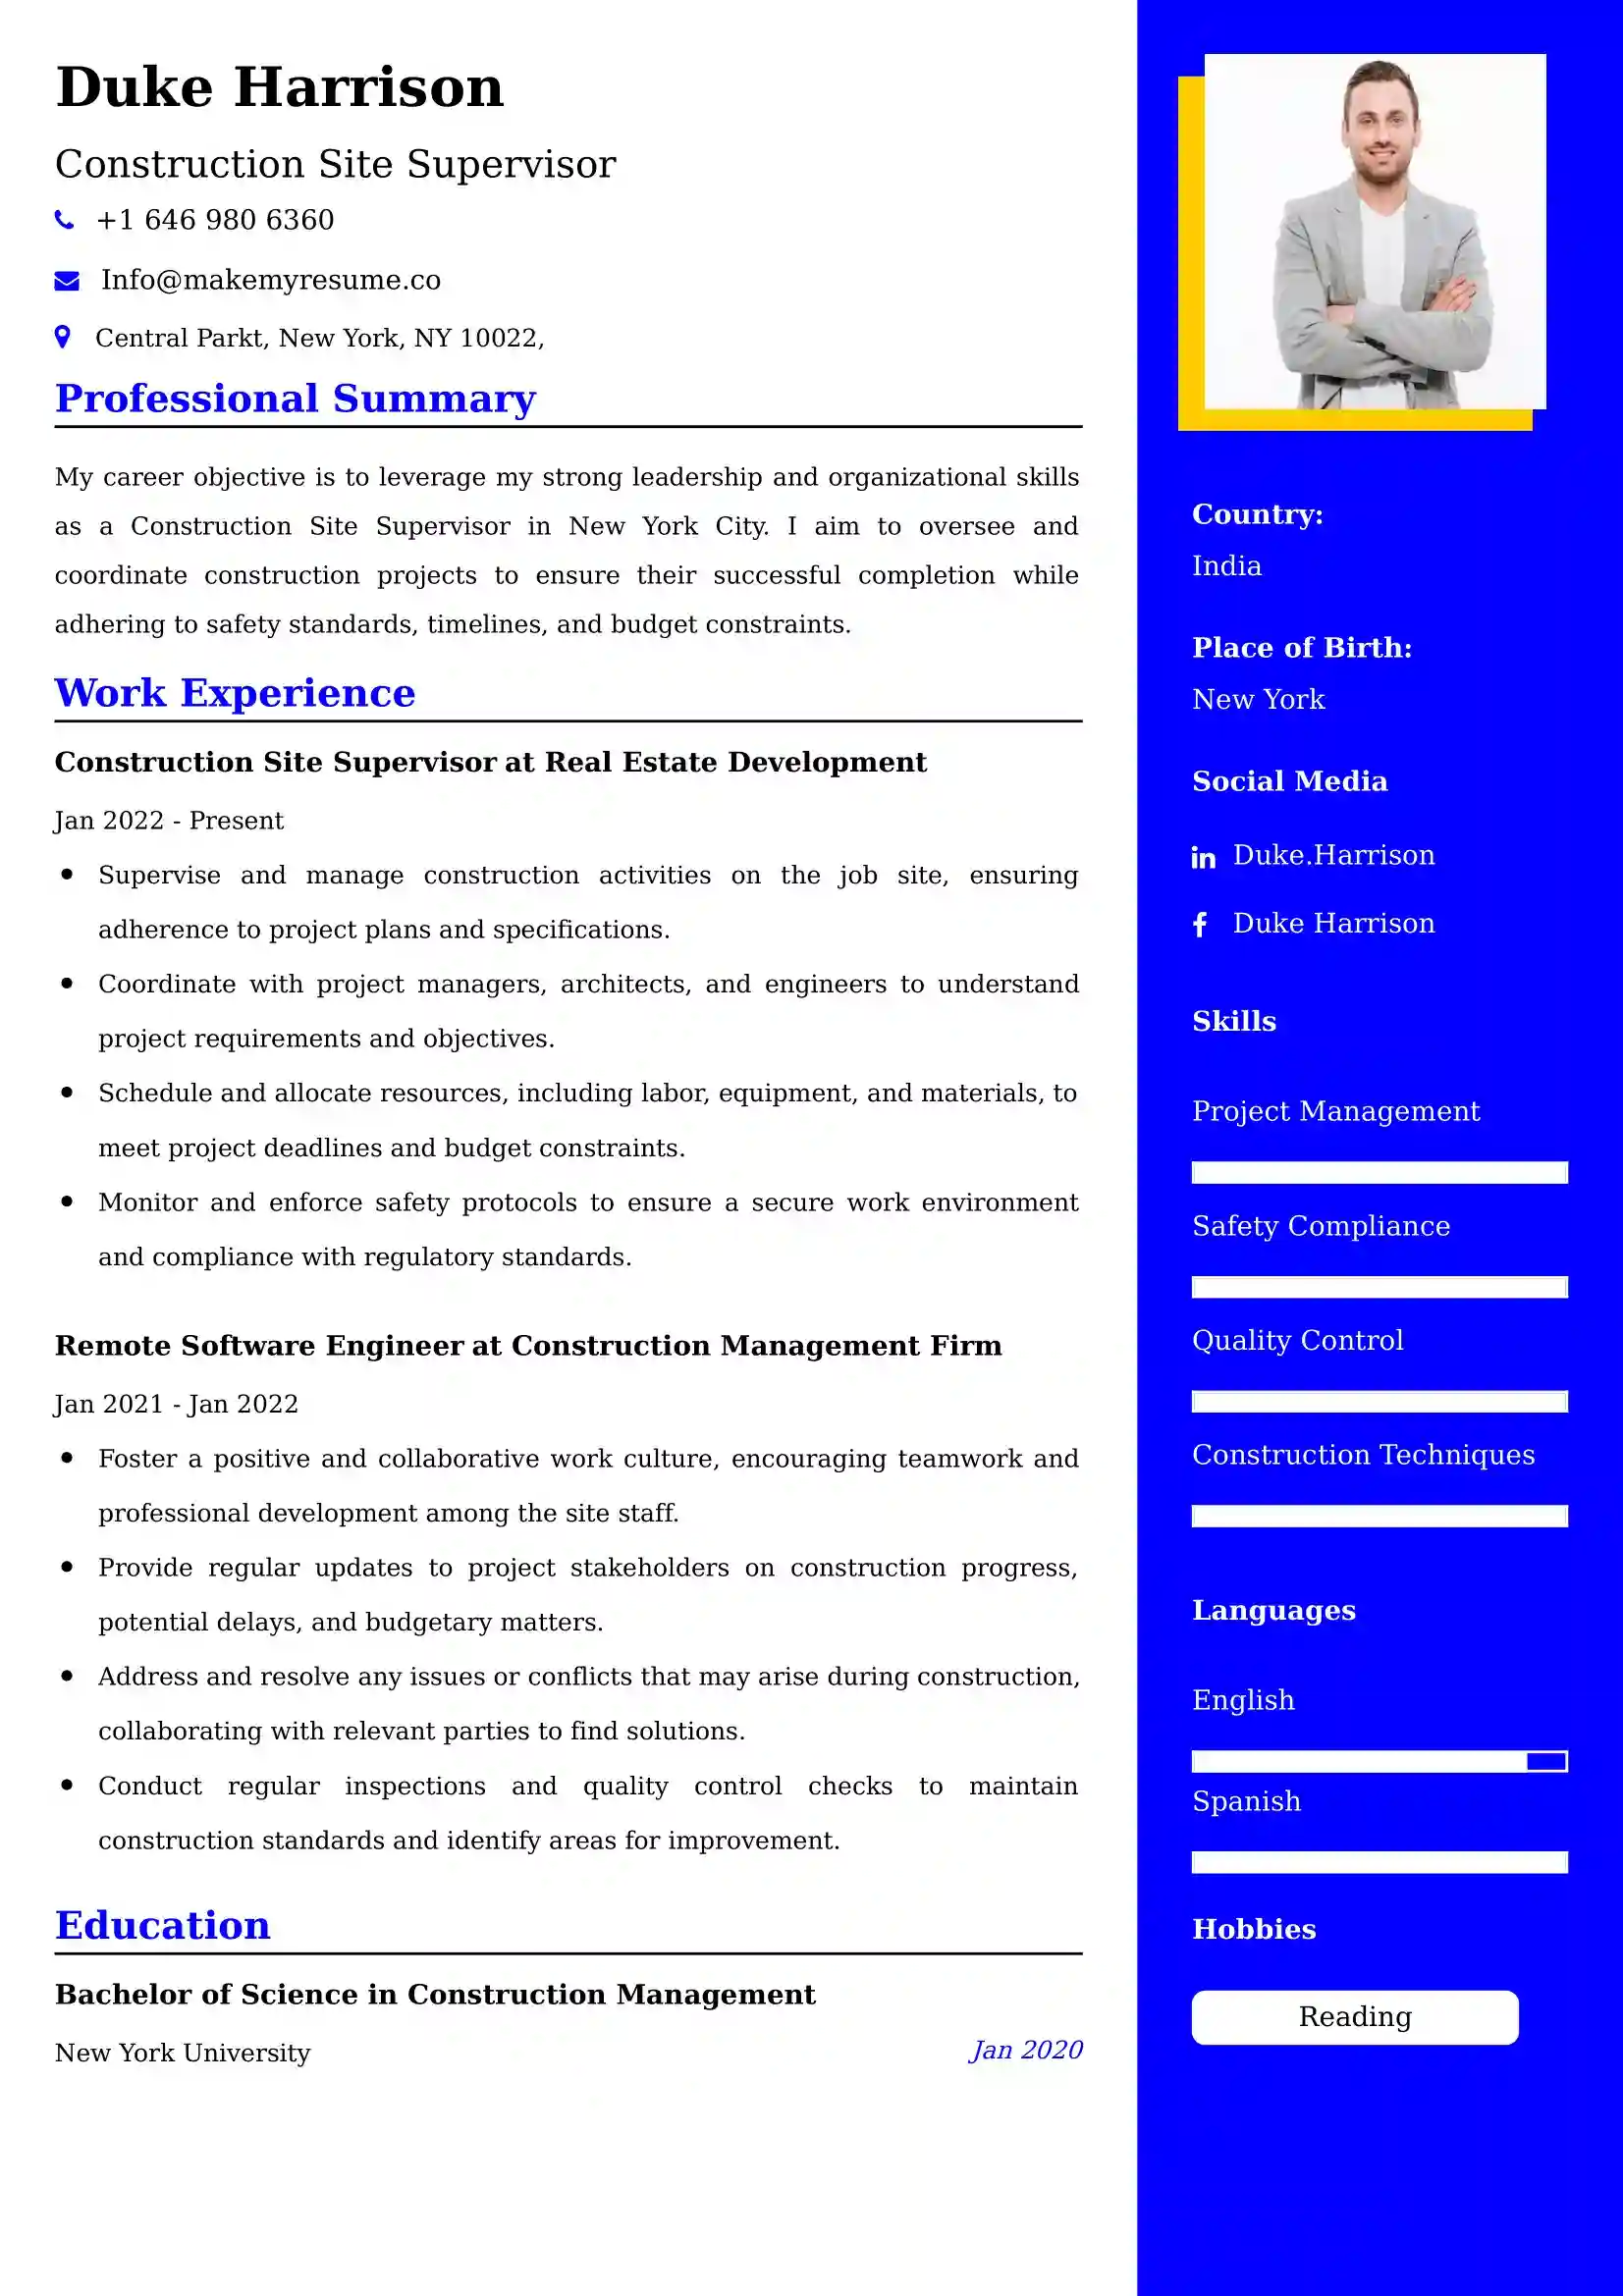 Construction Site Supervisor Resume Examples - UAE Format and Tips.